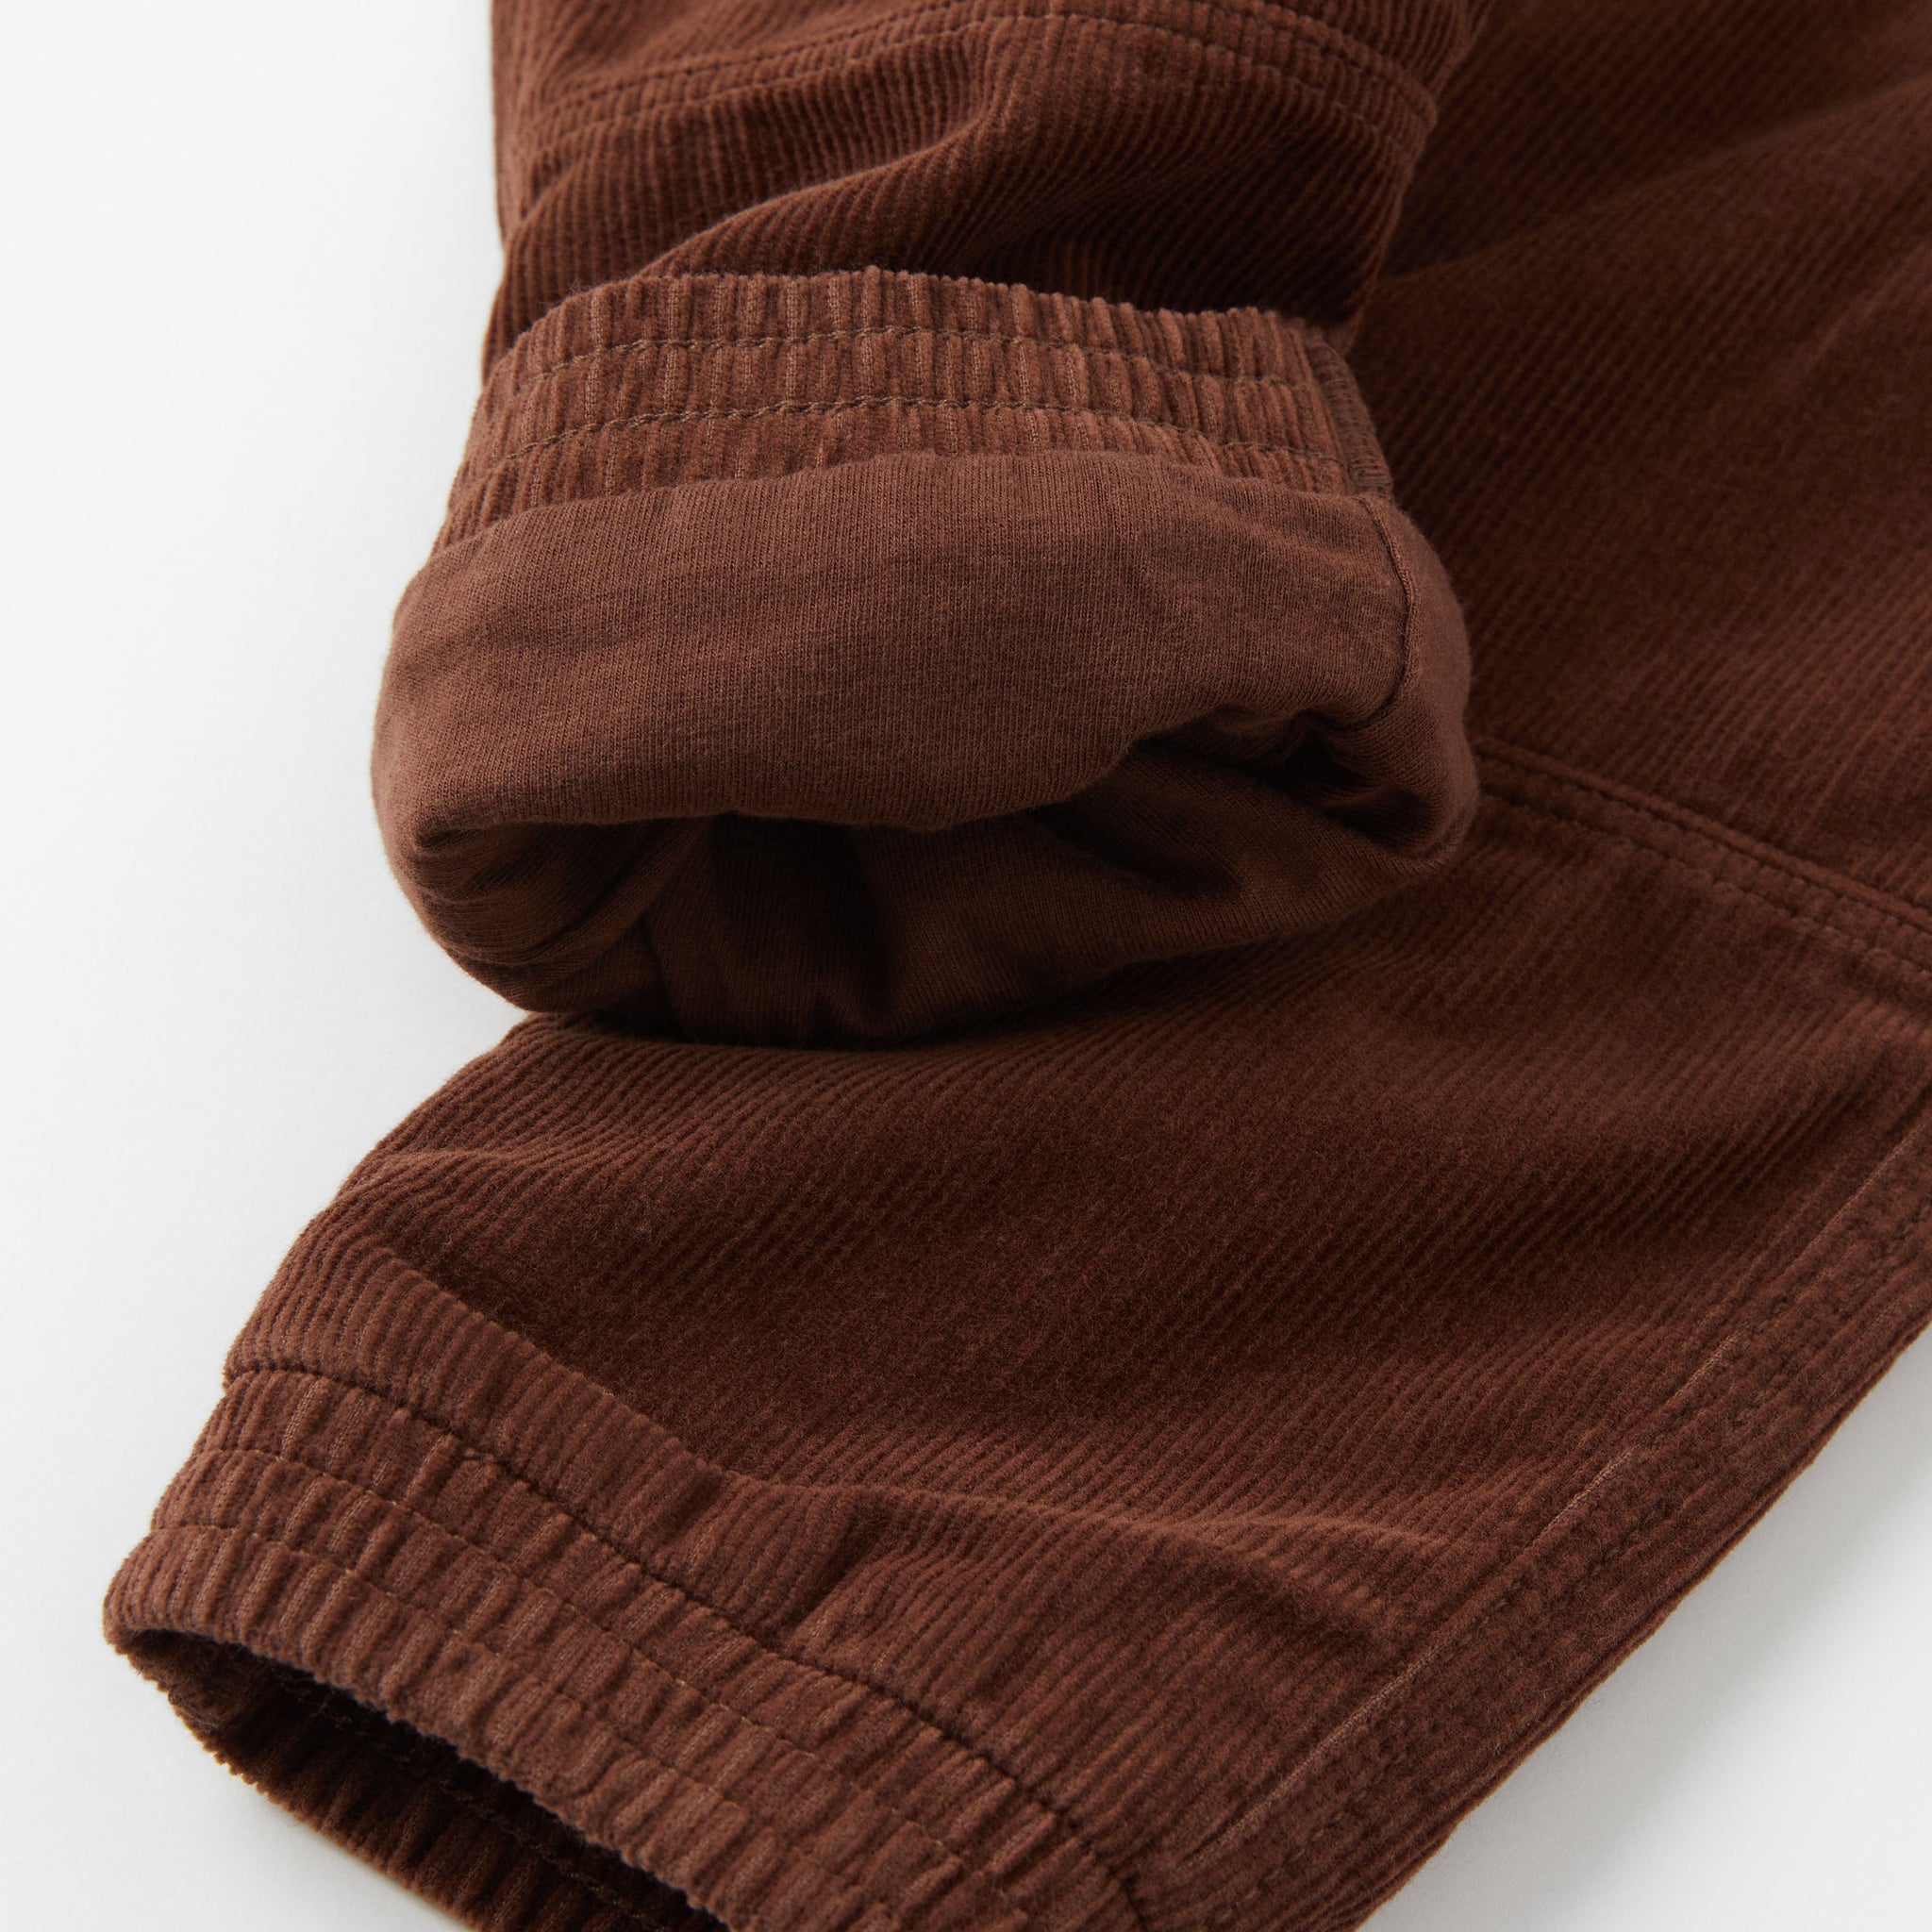 Organic Cotton Corduroy Kids Trousers from the Polarn O. Pyret kidswear collection. Clothes made using sustainably sourced materials.